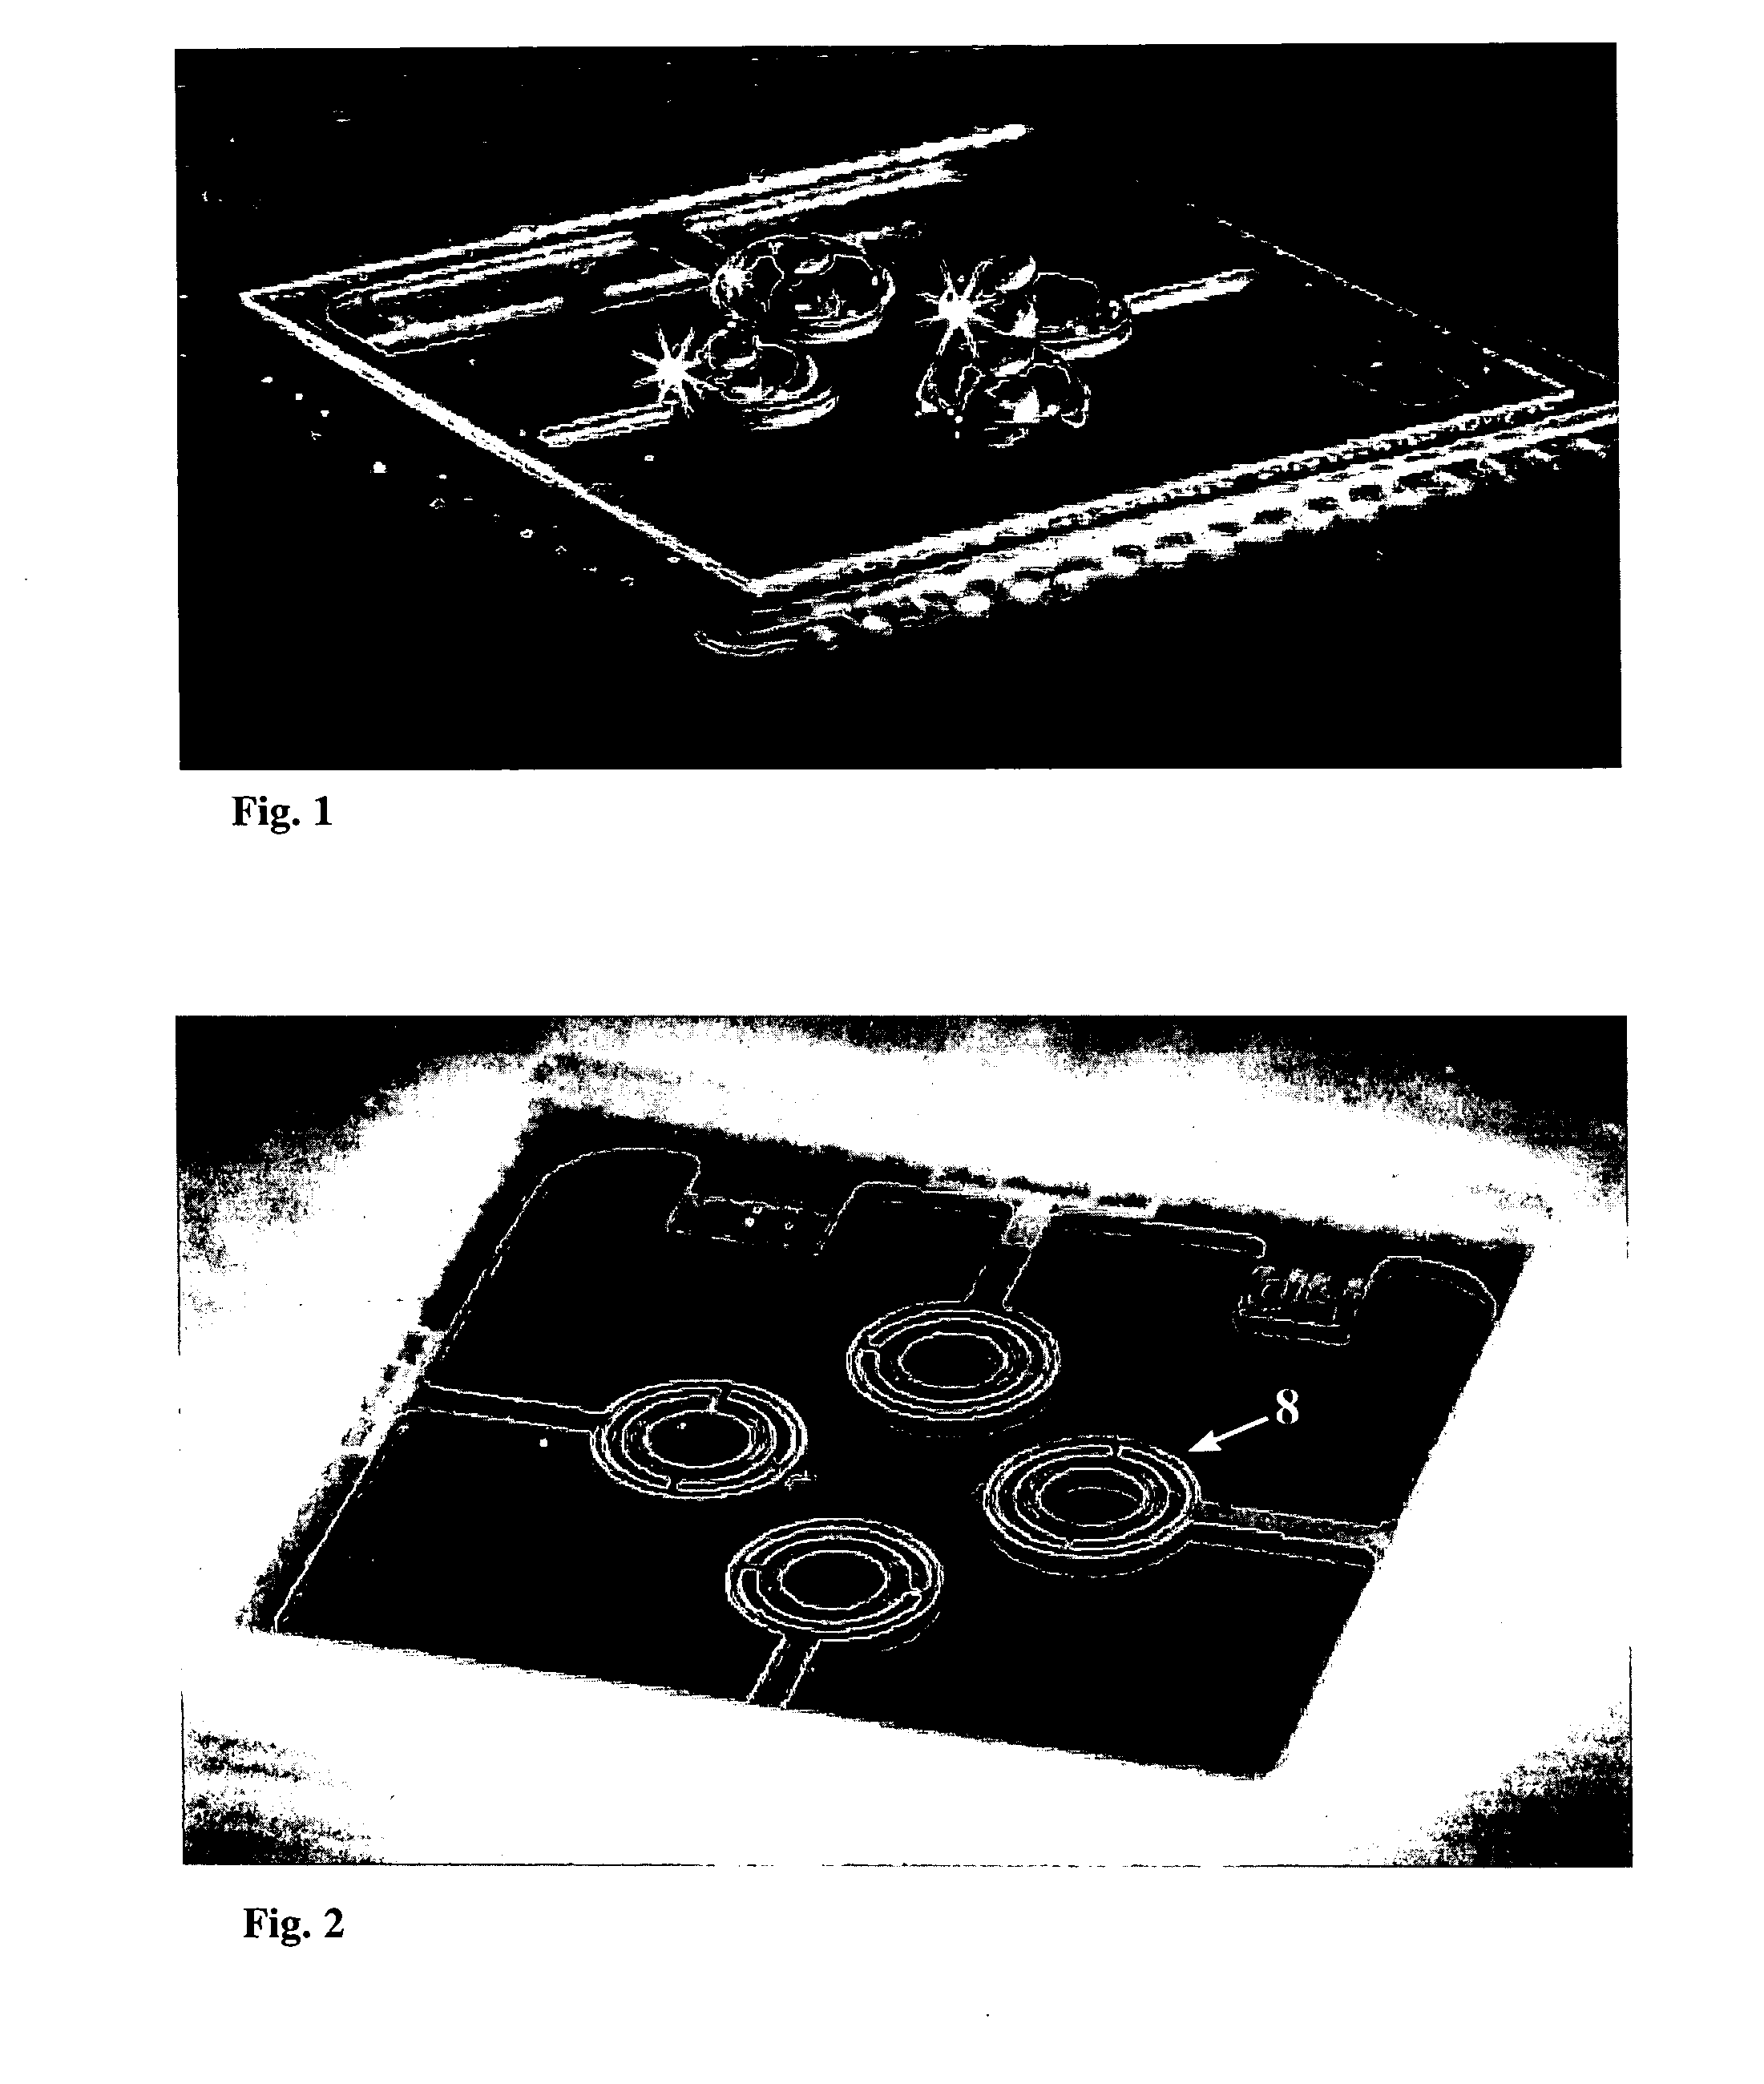 Apparatus for regulating the temperature of a biological and/or chemical sample and method of using the same